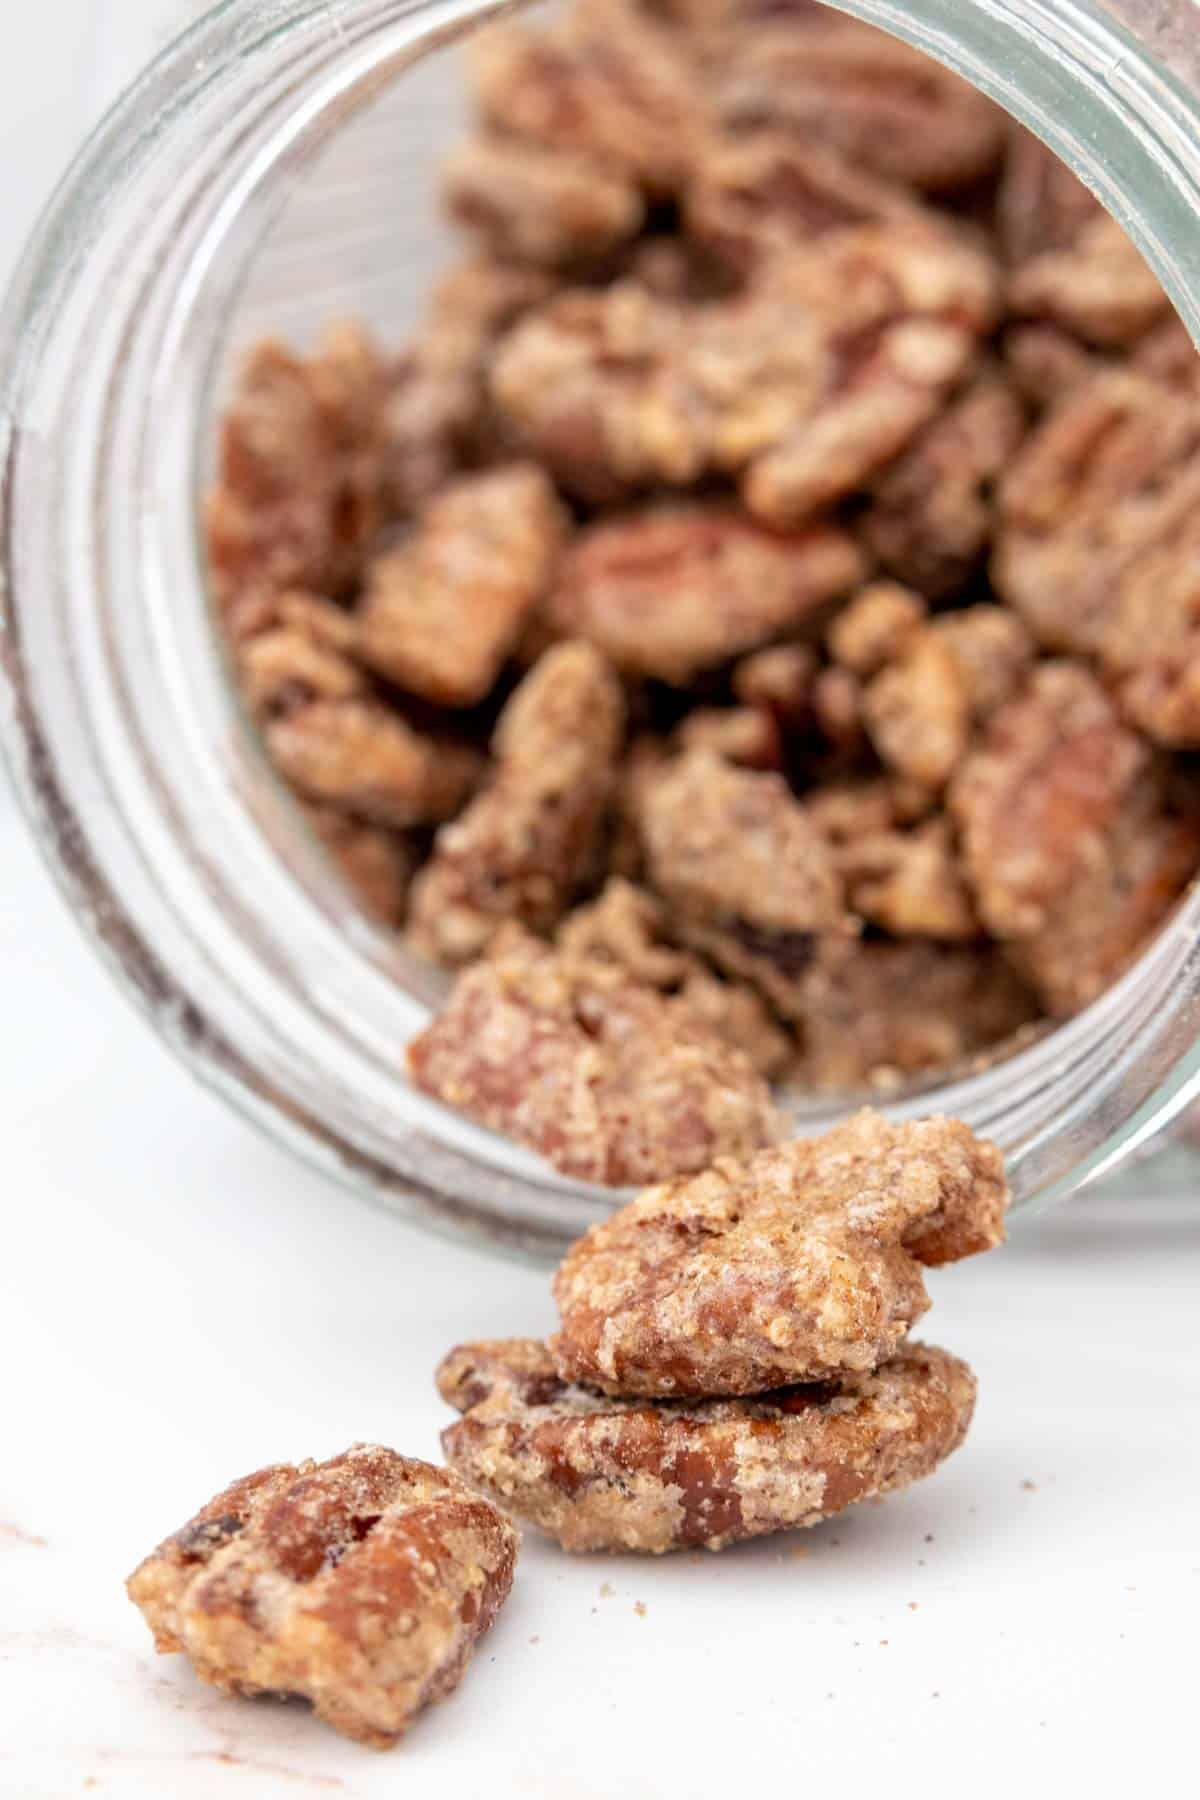 Candied pecans poured out of a glass container.